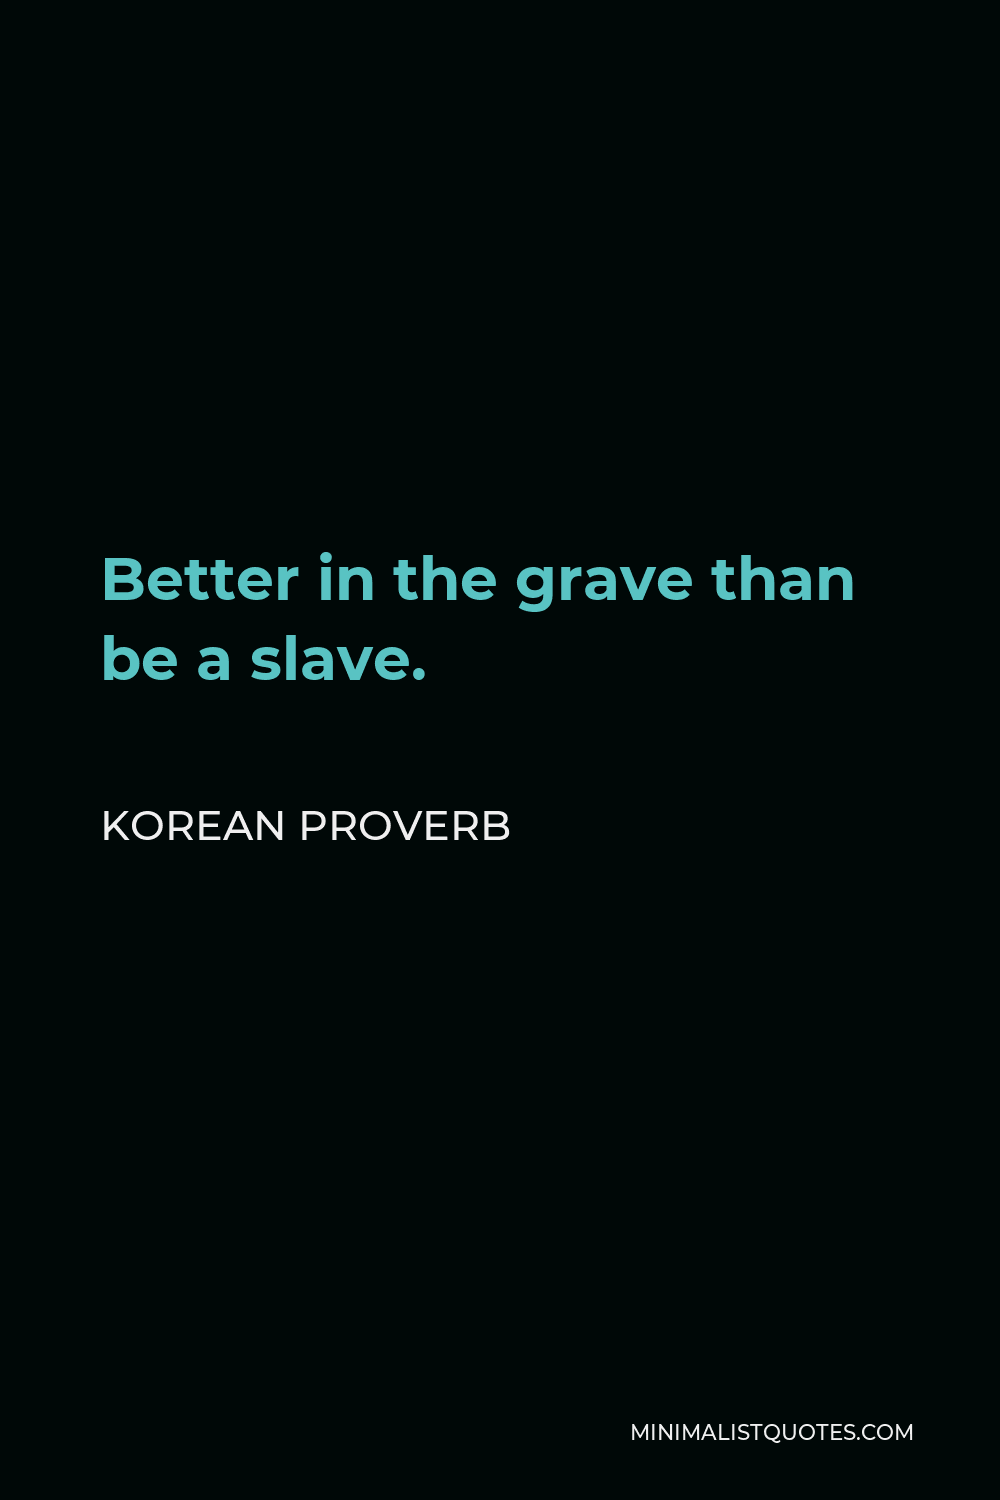 Korean Proverb Quote - Better in the grave than be a slave.